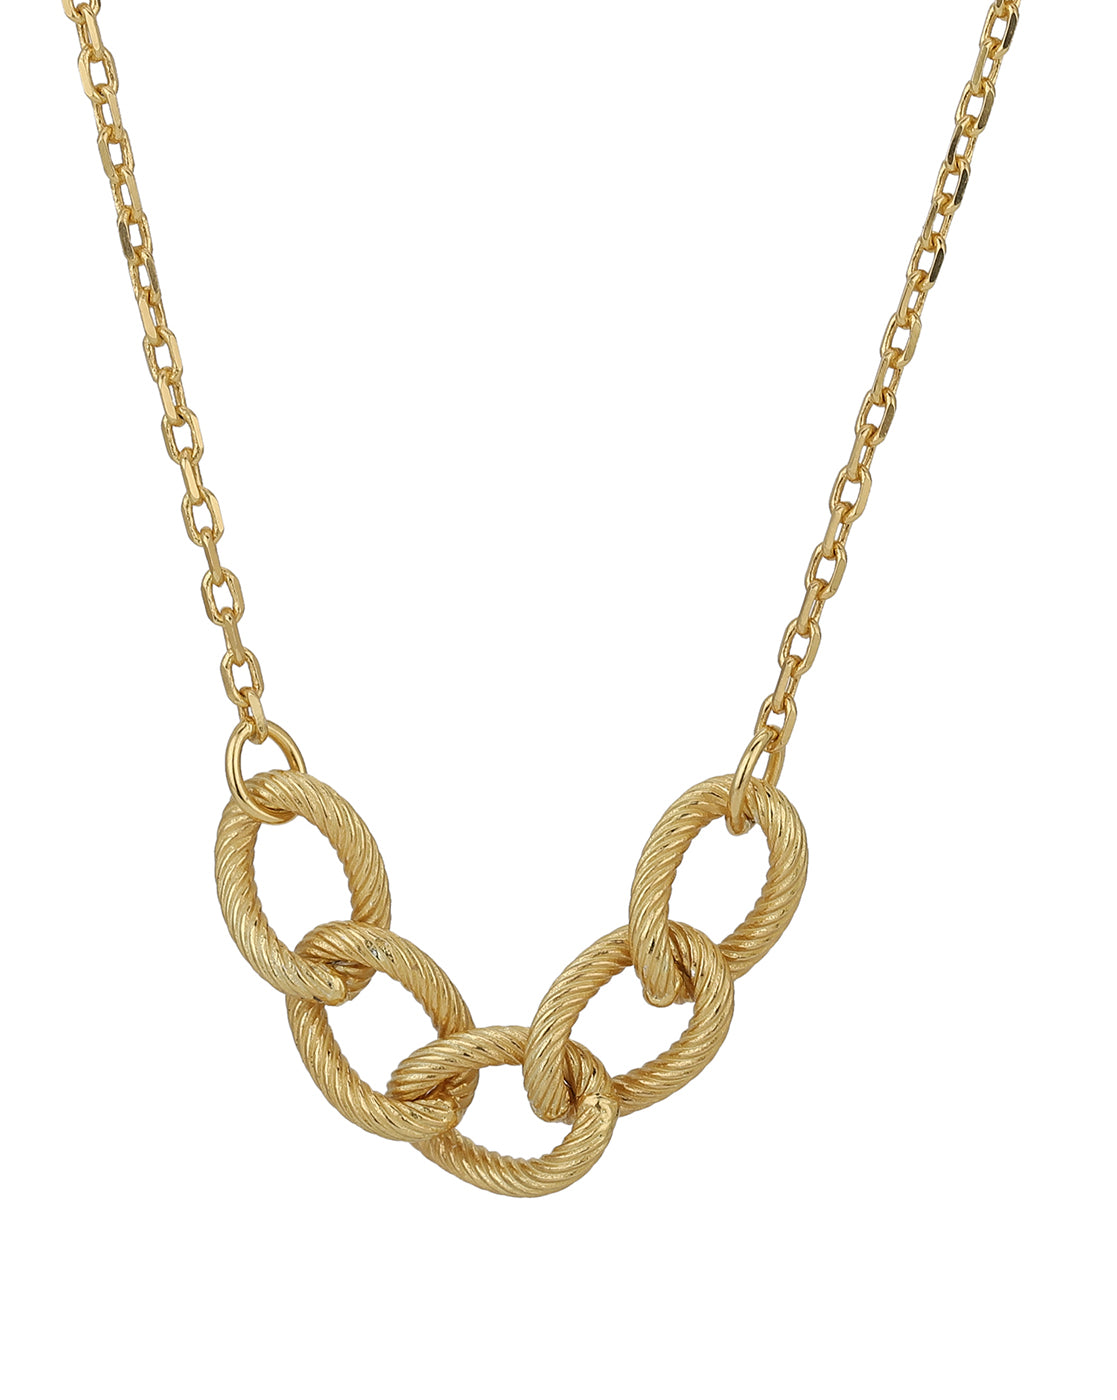 Sterling silver oval rolo link necklace